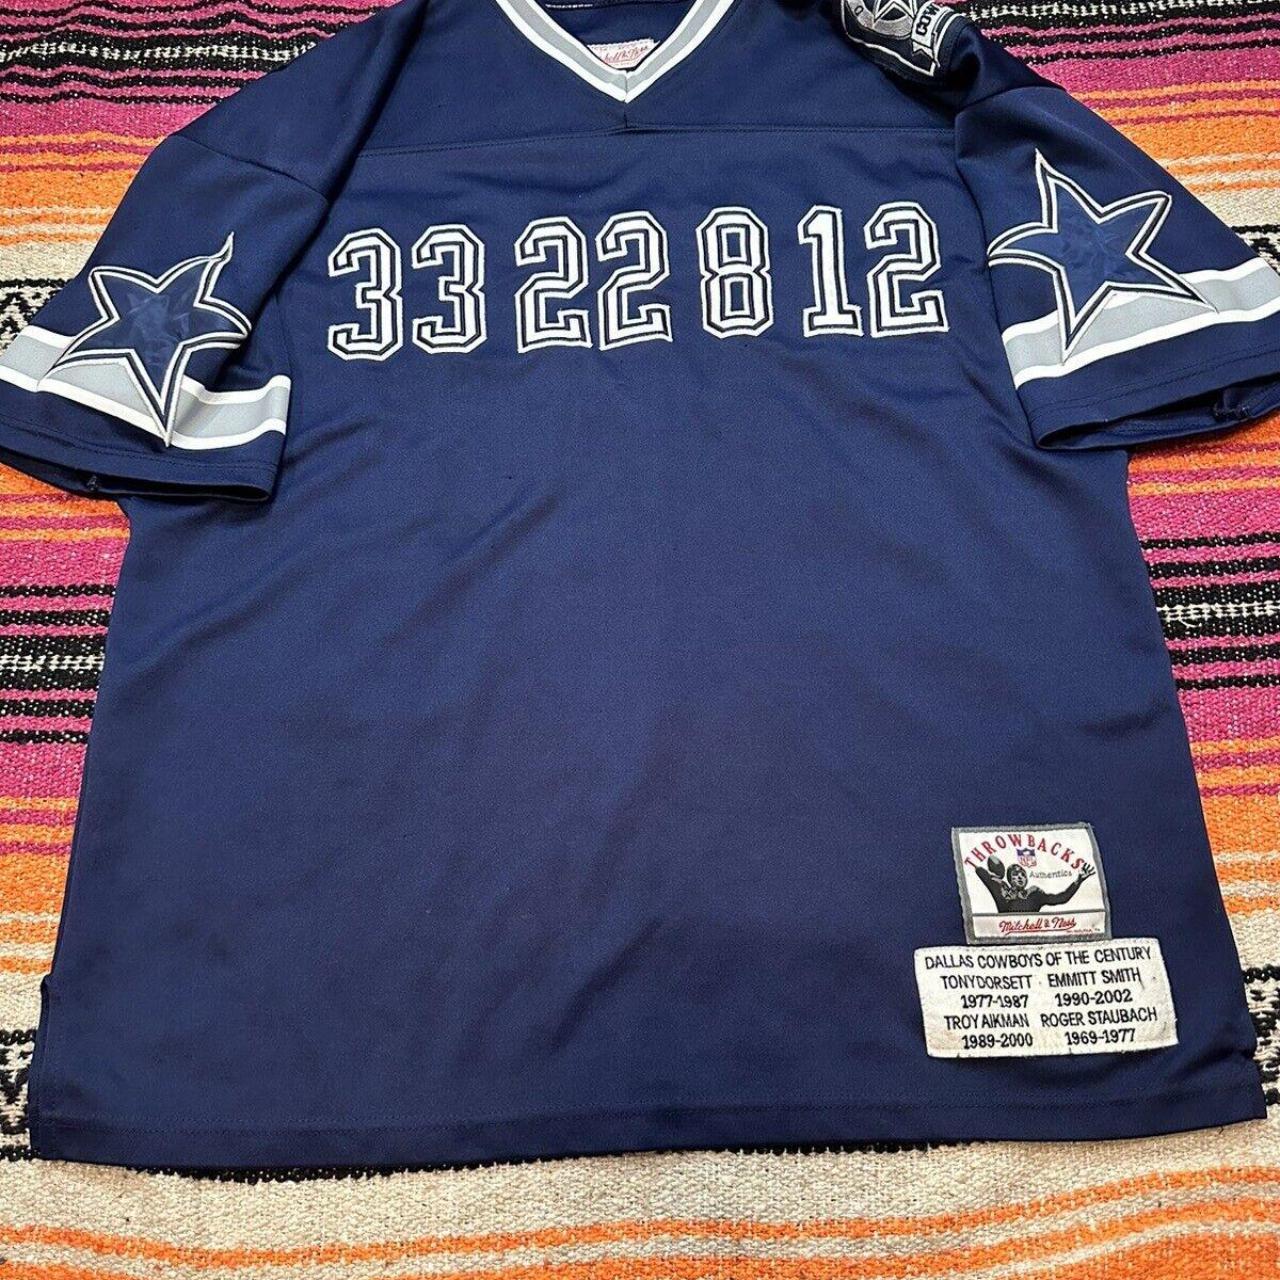 cowboys of the century jersey